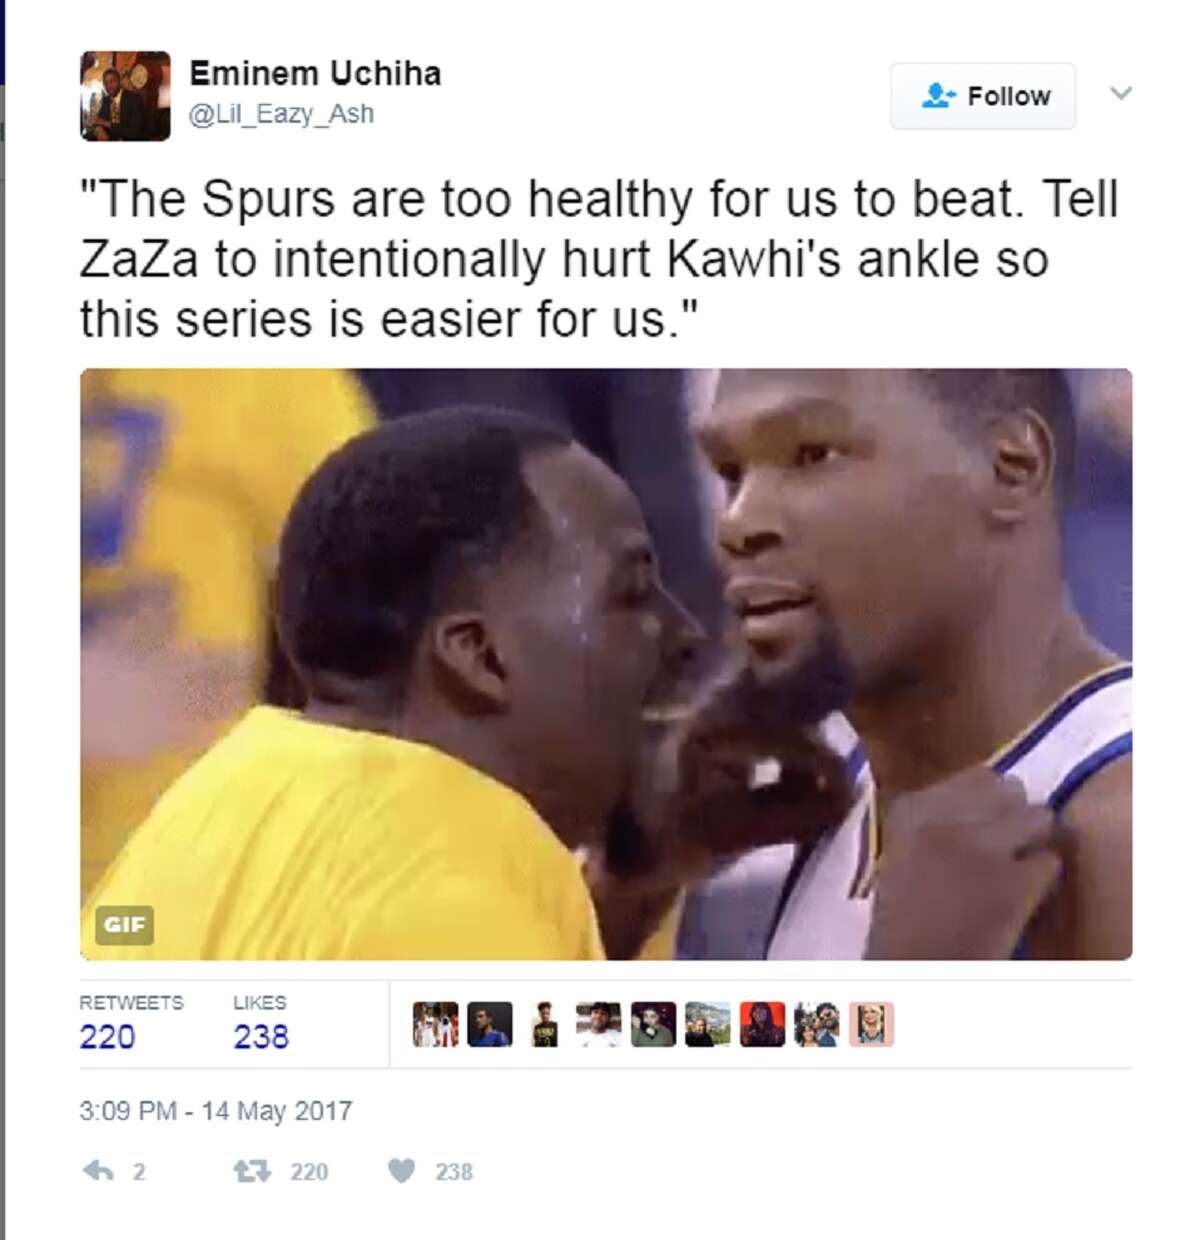 It did not take long for Twitter to take issue with Zaza Pachulia after he seemingly intentionally undercut Kawhi Leonard in Game 1 by obstructing his landing on a shot that led to Leonard rolling his left ankle and forcing him from the game.